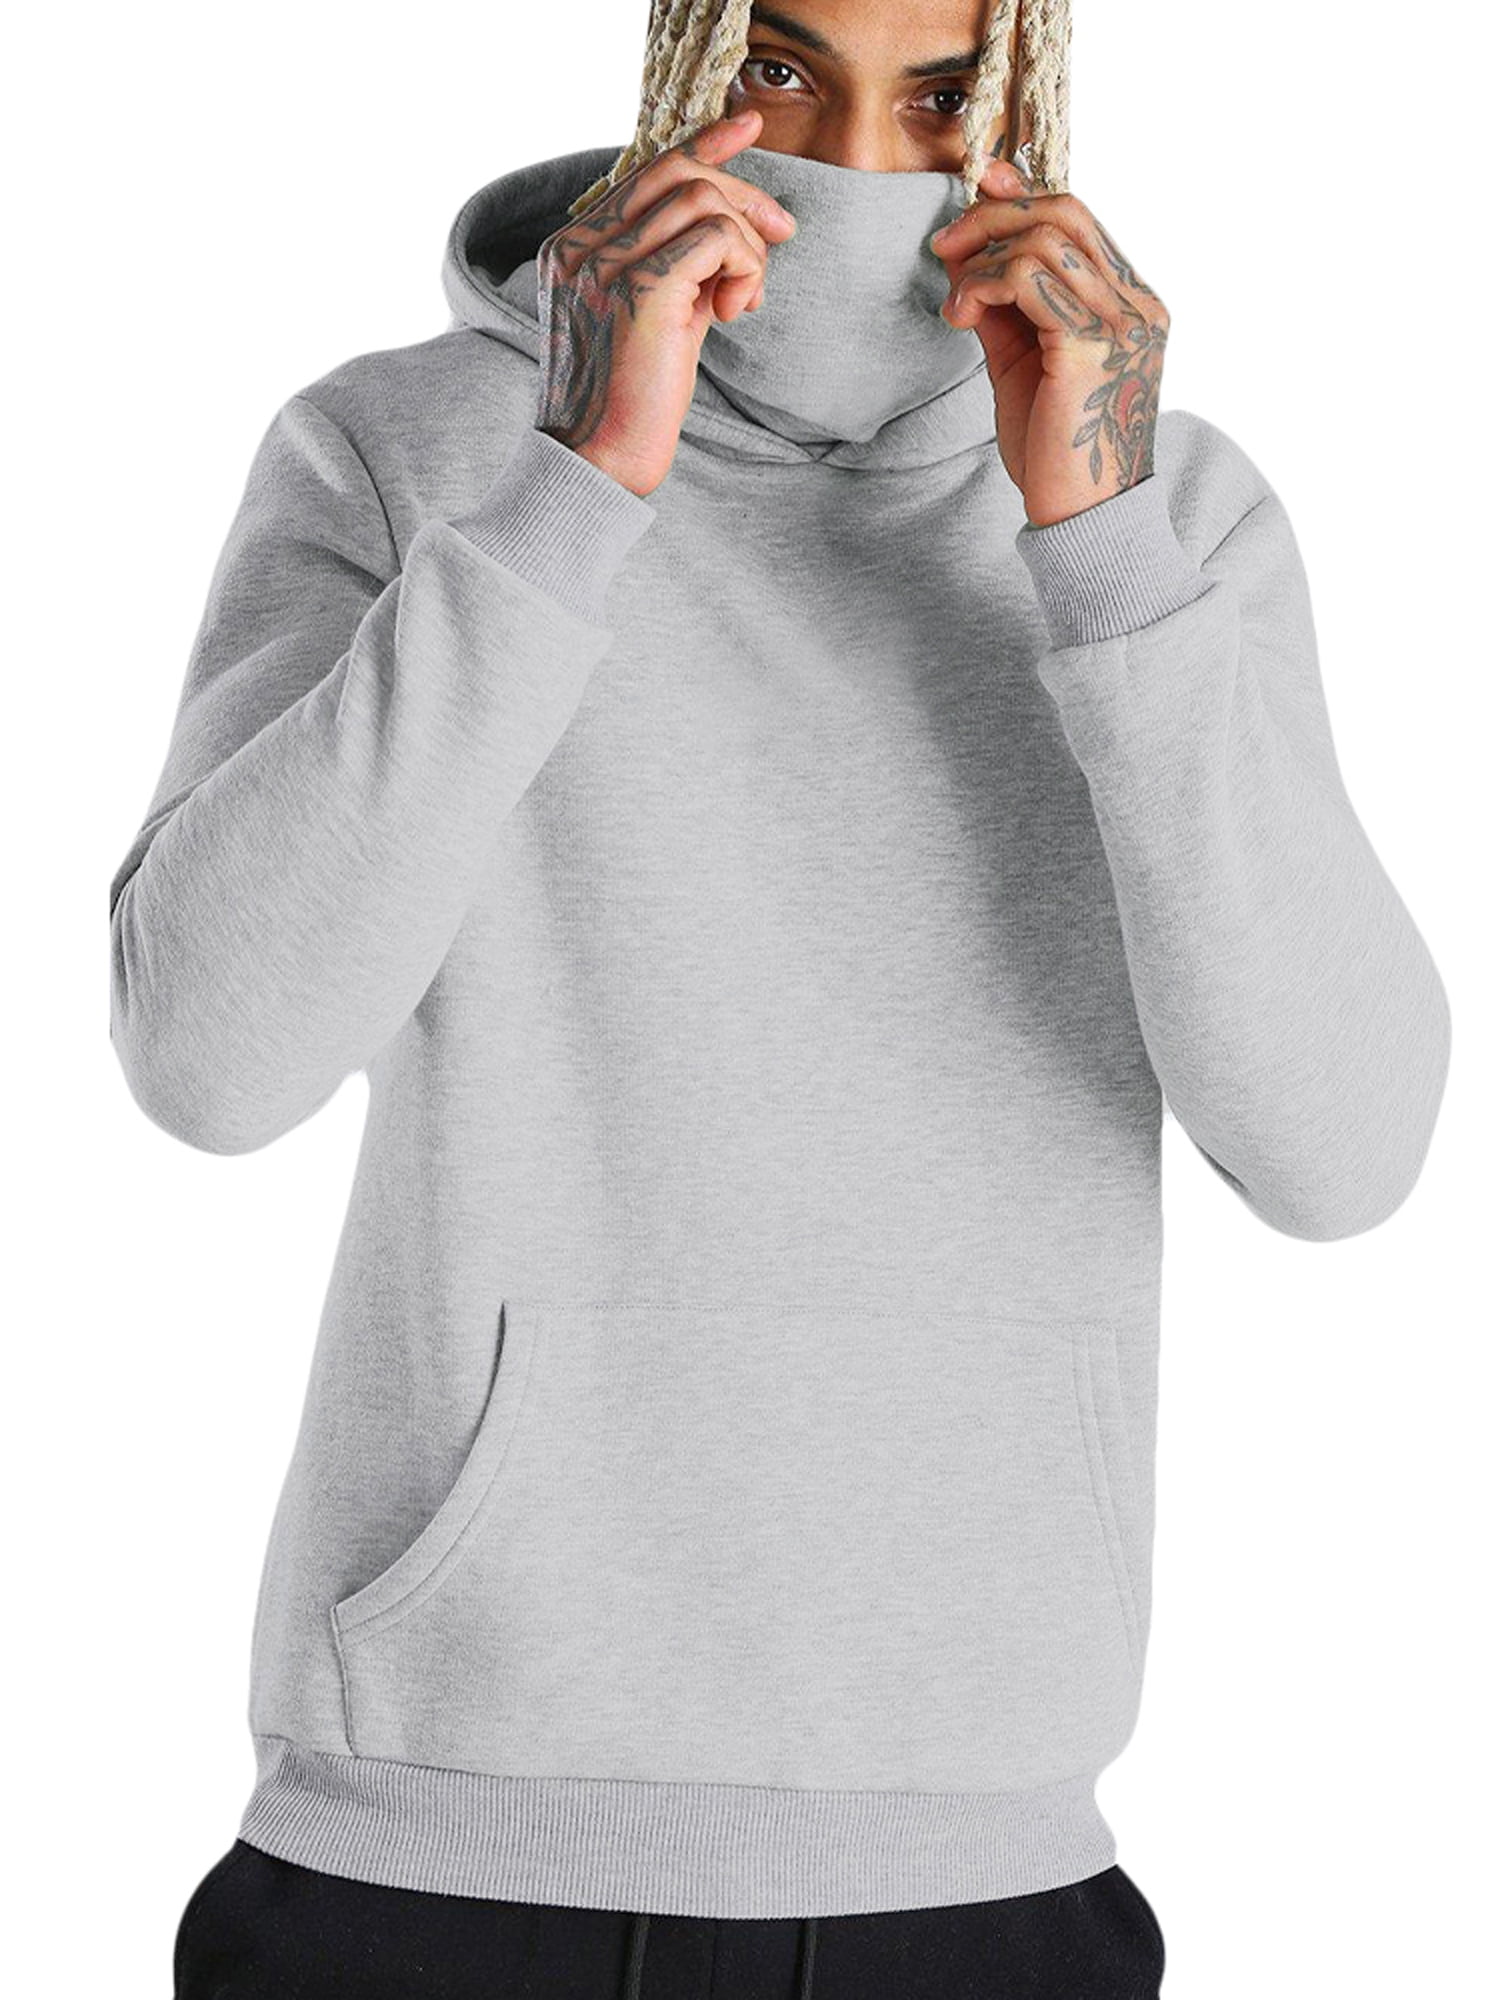 Heless Men Stitching Knitted Regular Fit Winter Warm Hooded Pullover Sweater